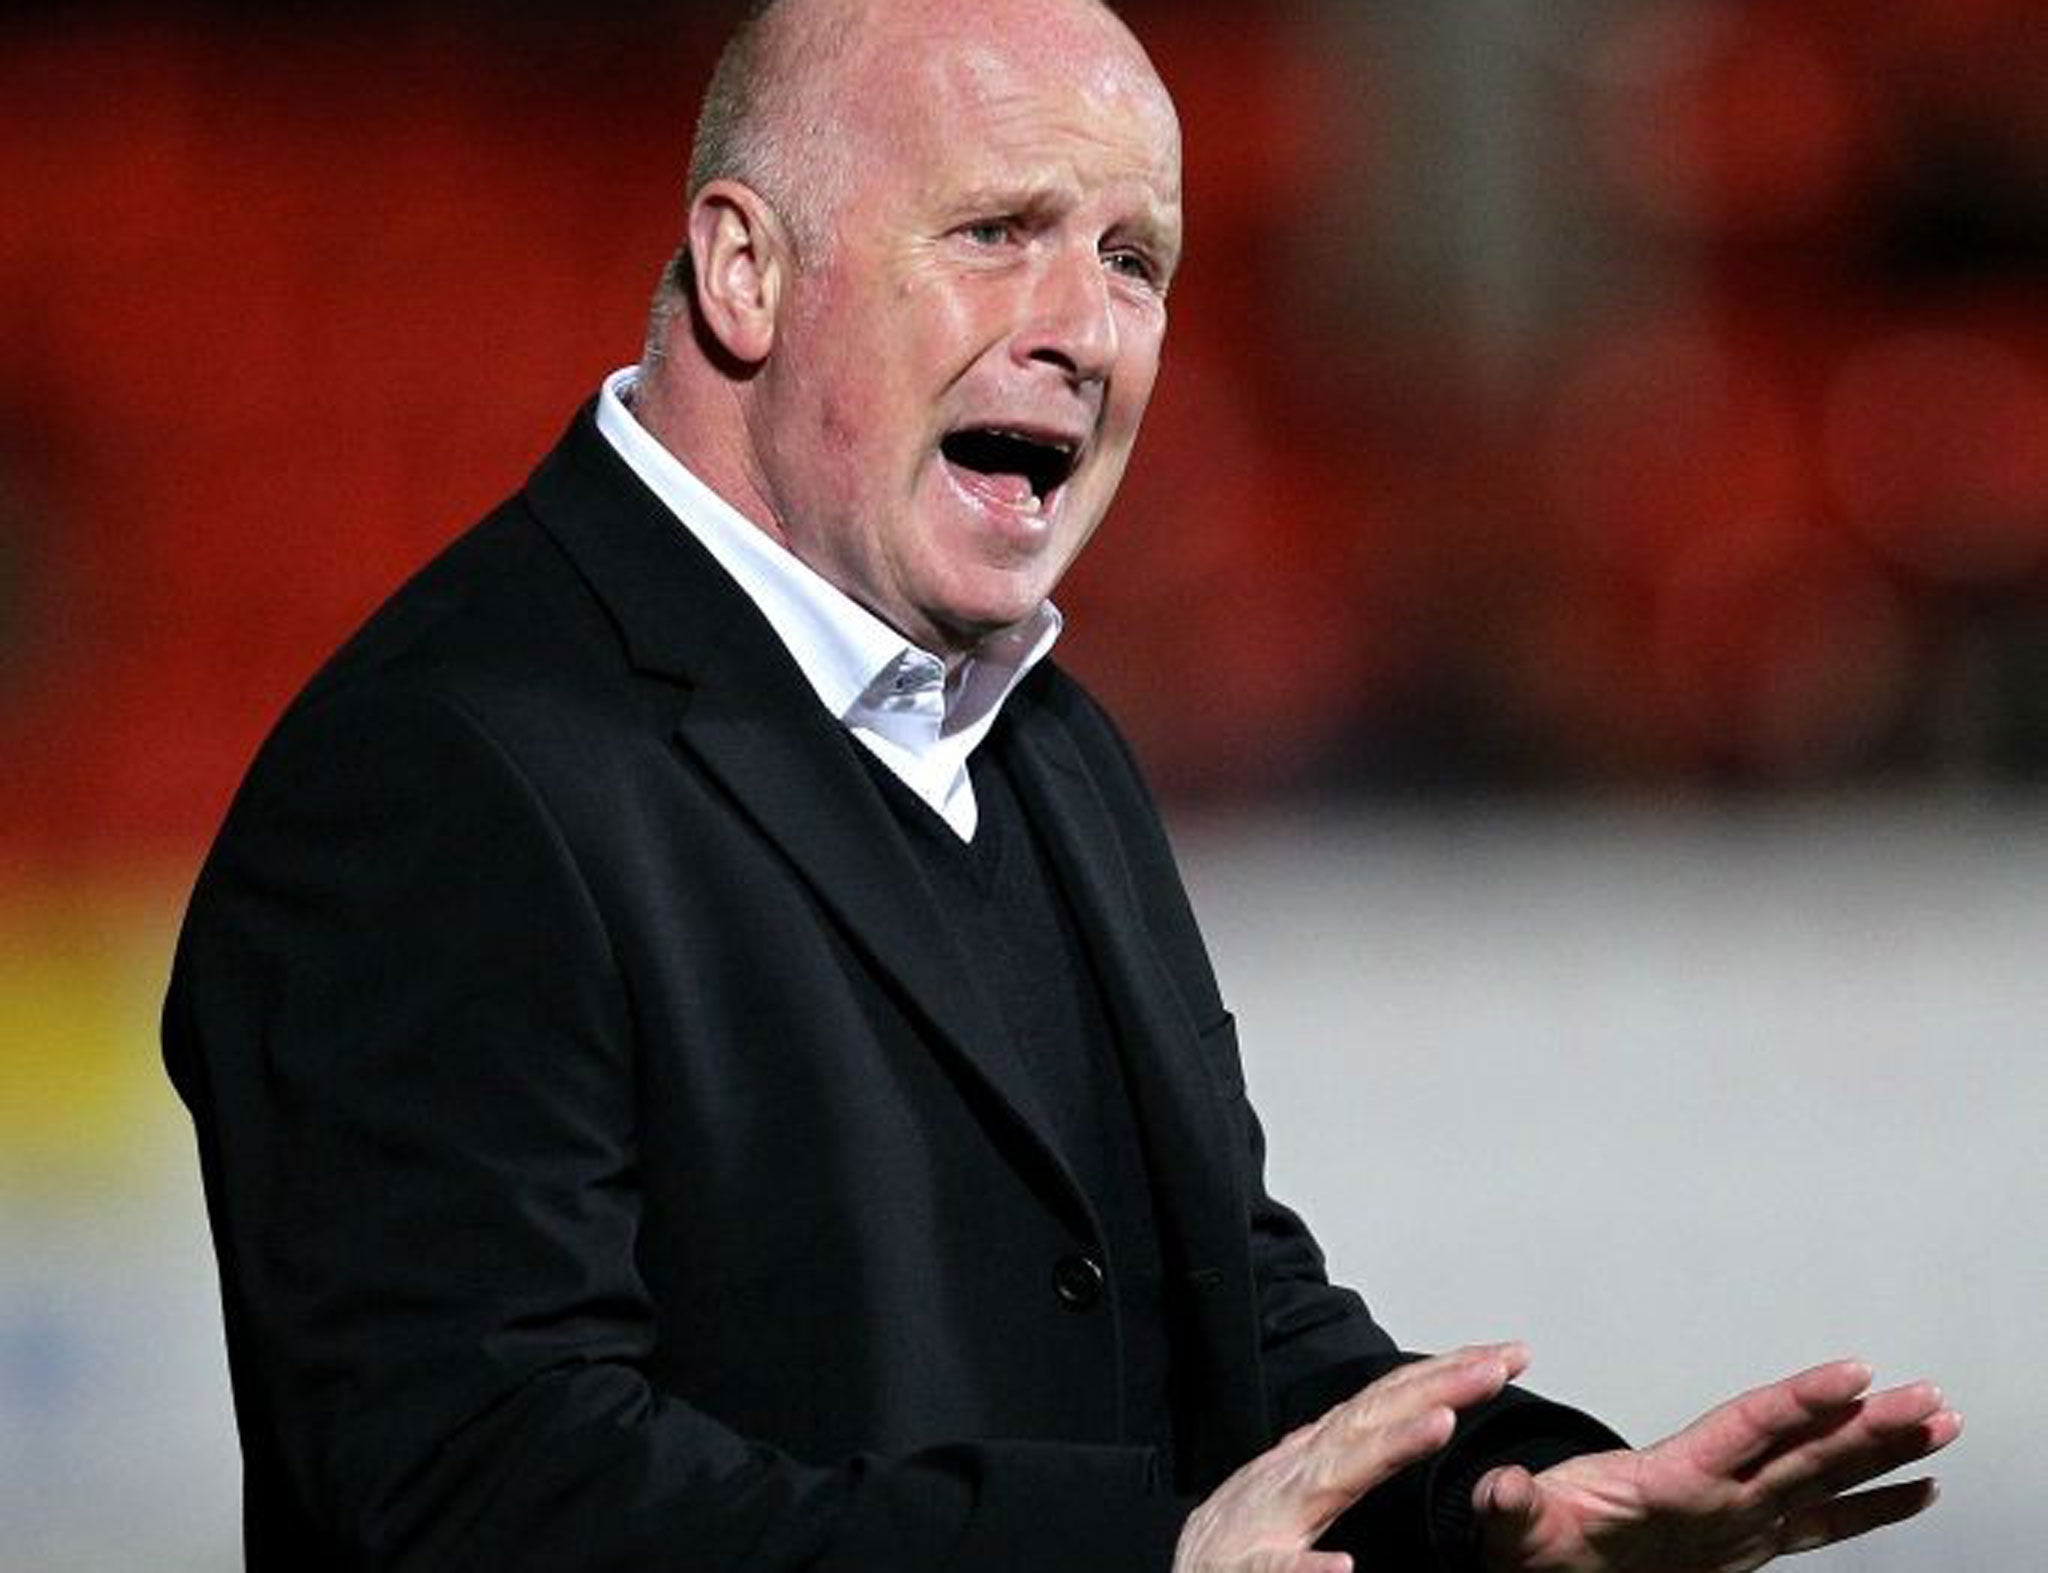 Dundee United manager Peter Houston is in talks with Blackpool